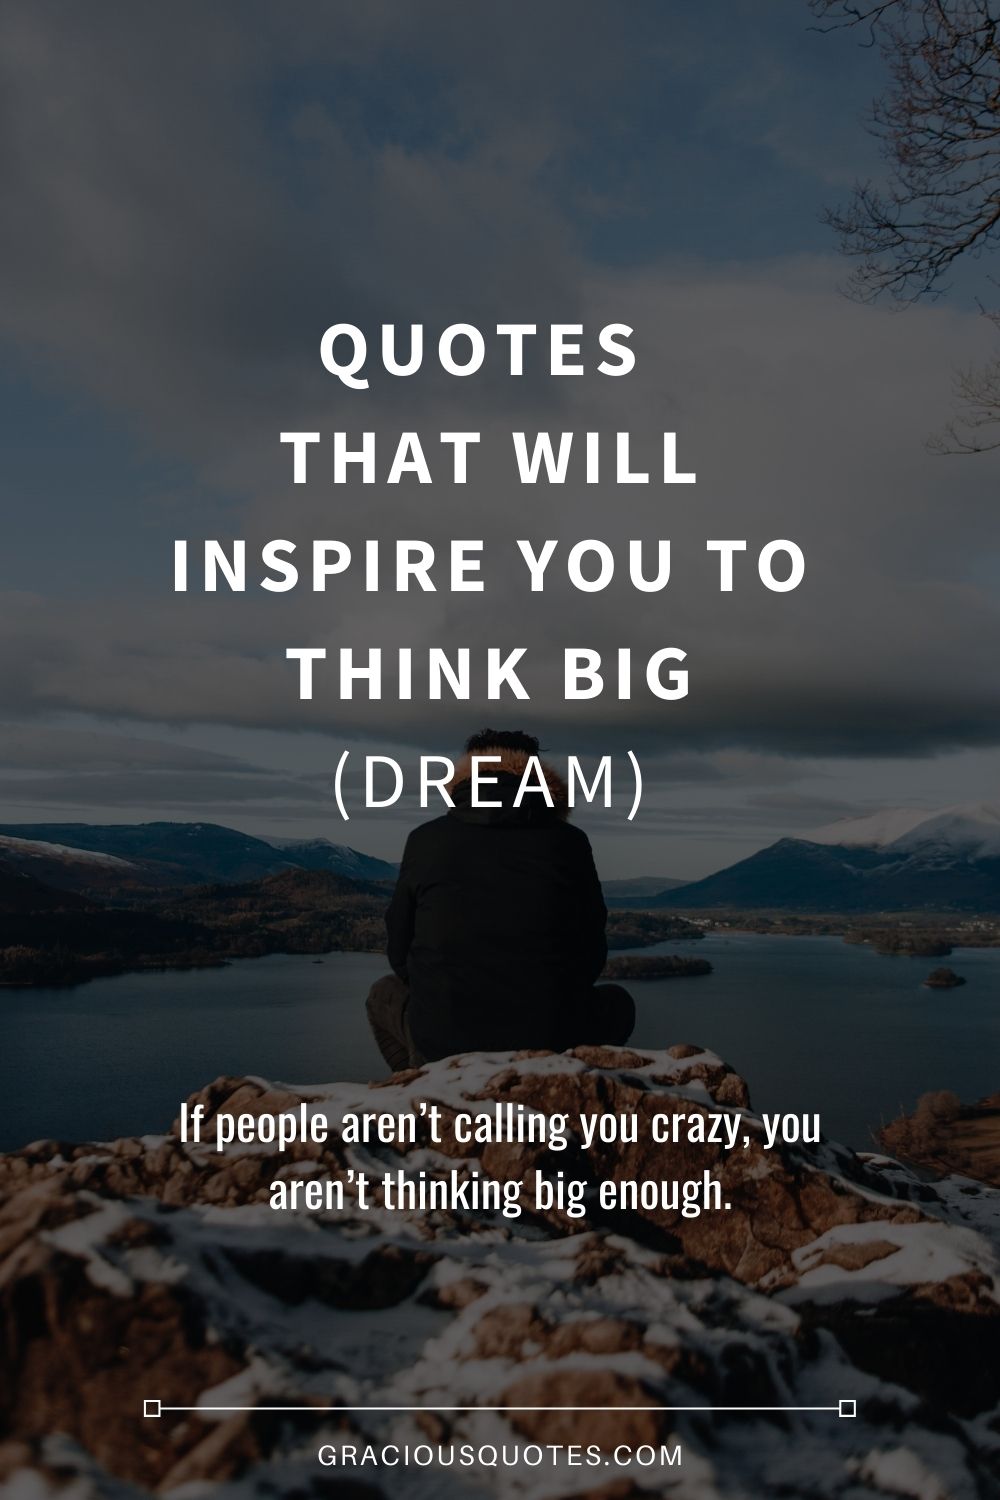 Quotes that will Inspire You to Think Big (DREAM) - Gracious Quotes